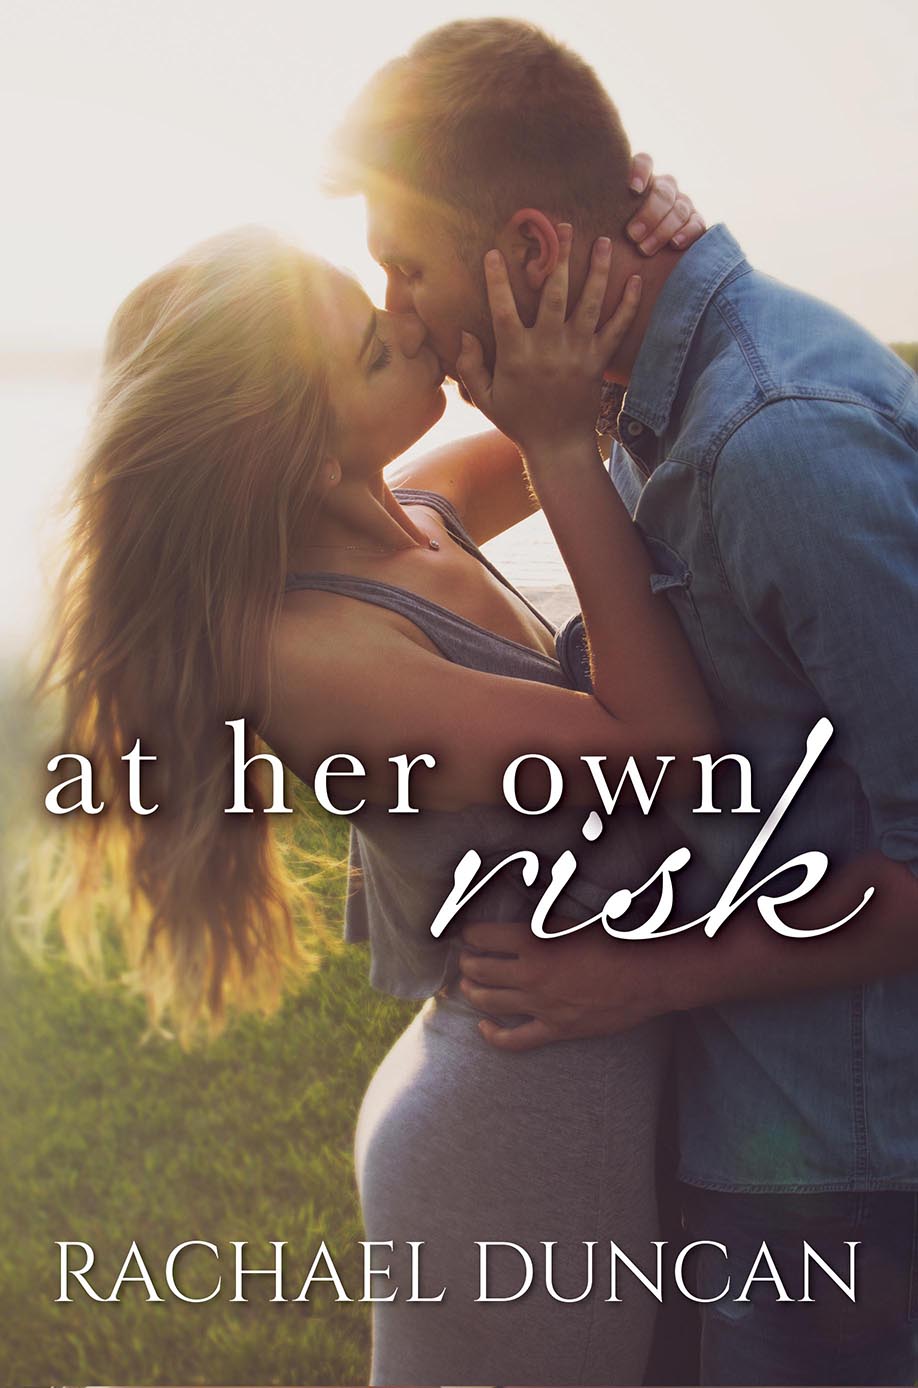 Category At-her-own-risk-by-rachael-duncan-release-blitz-review picture